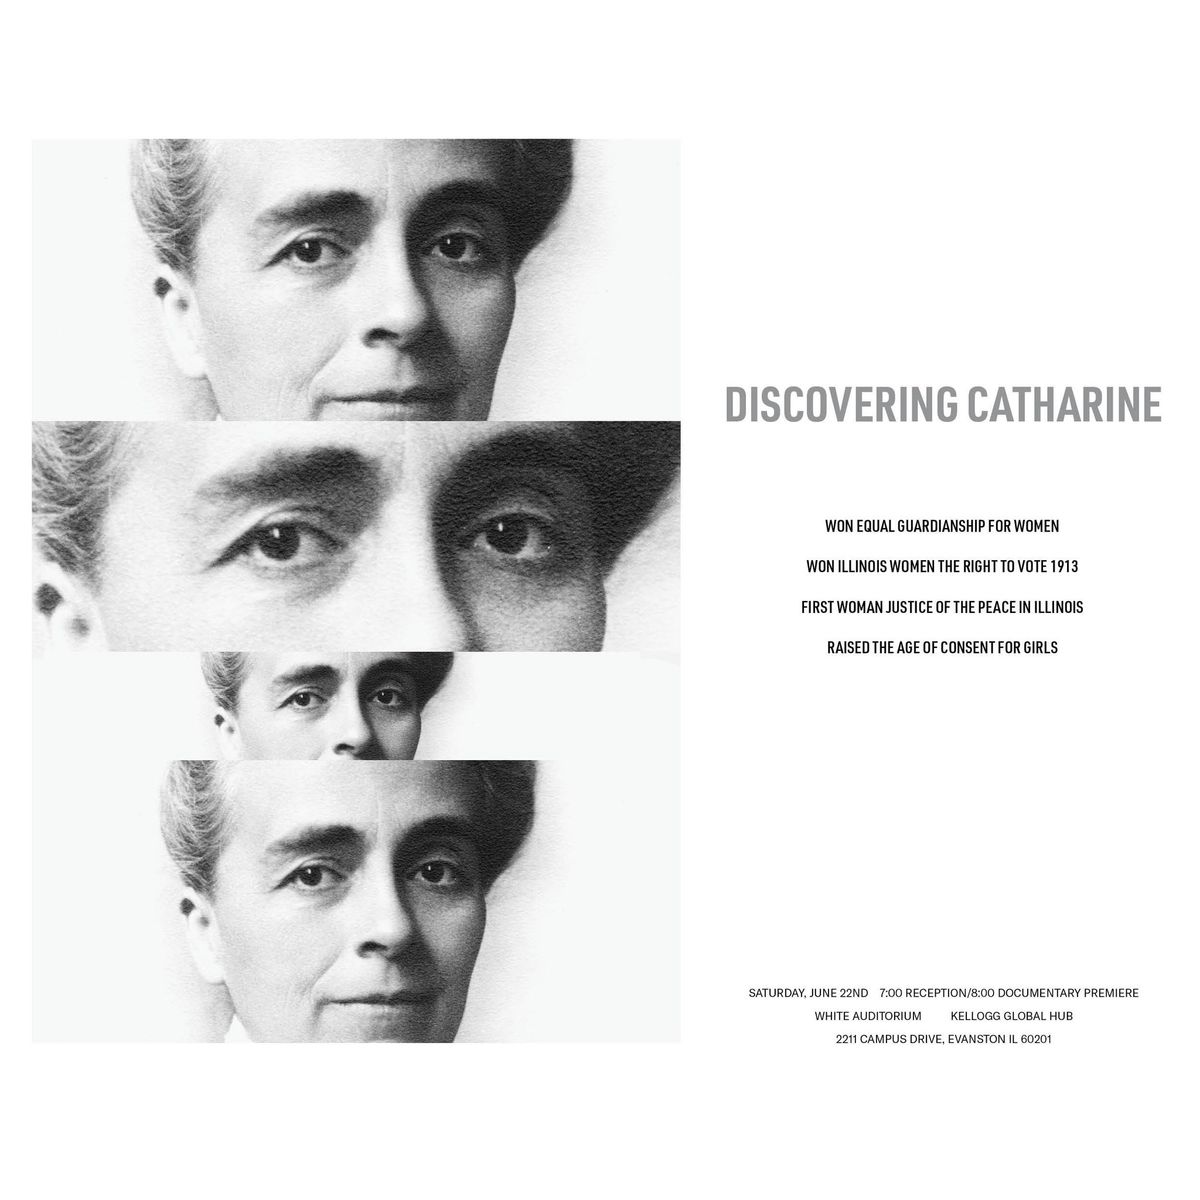 Discovering Catharine Premiere in Evanston Illinois.  All are welcome to join us and hear her story.